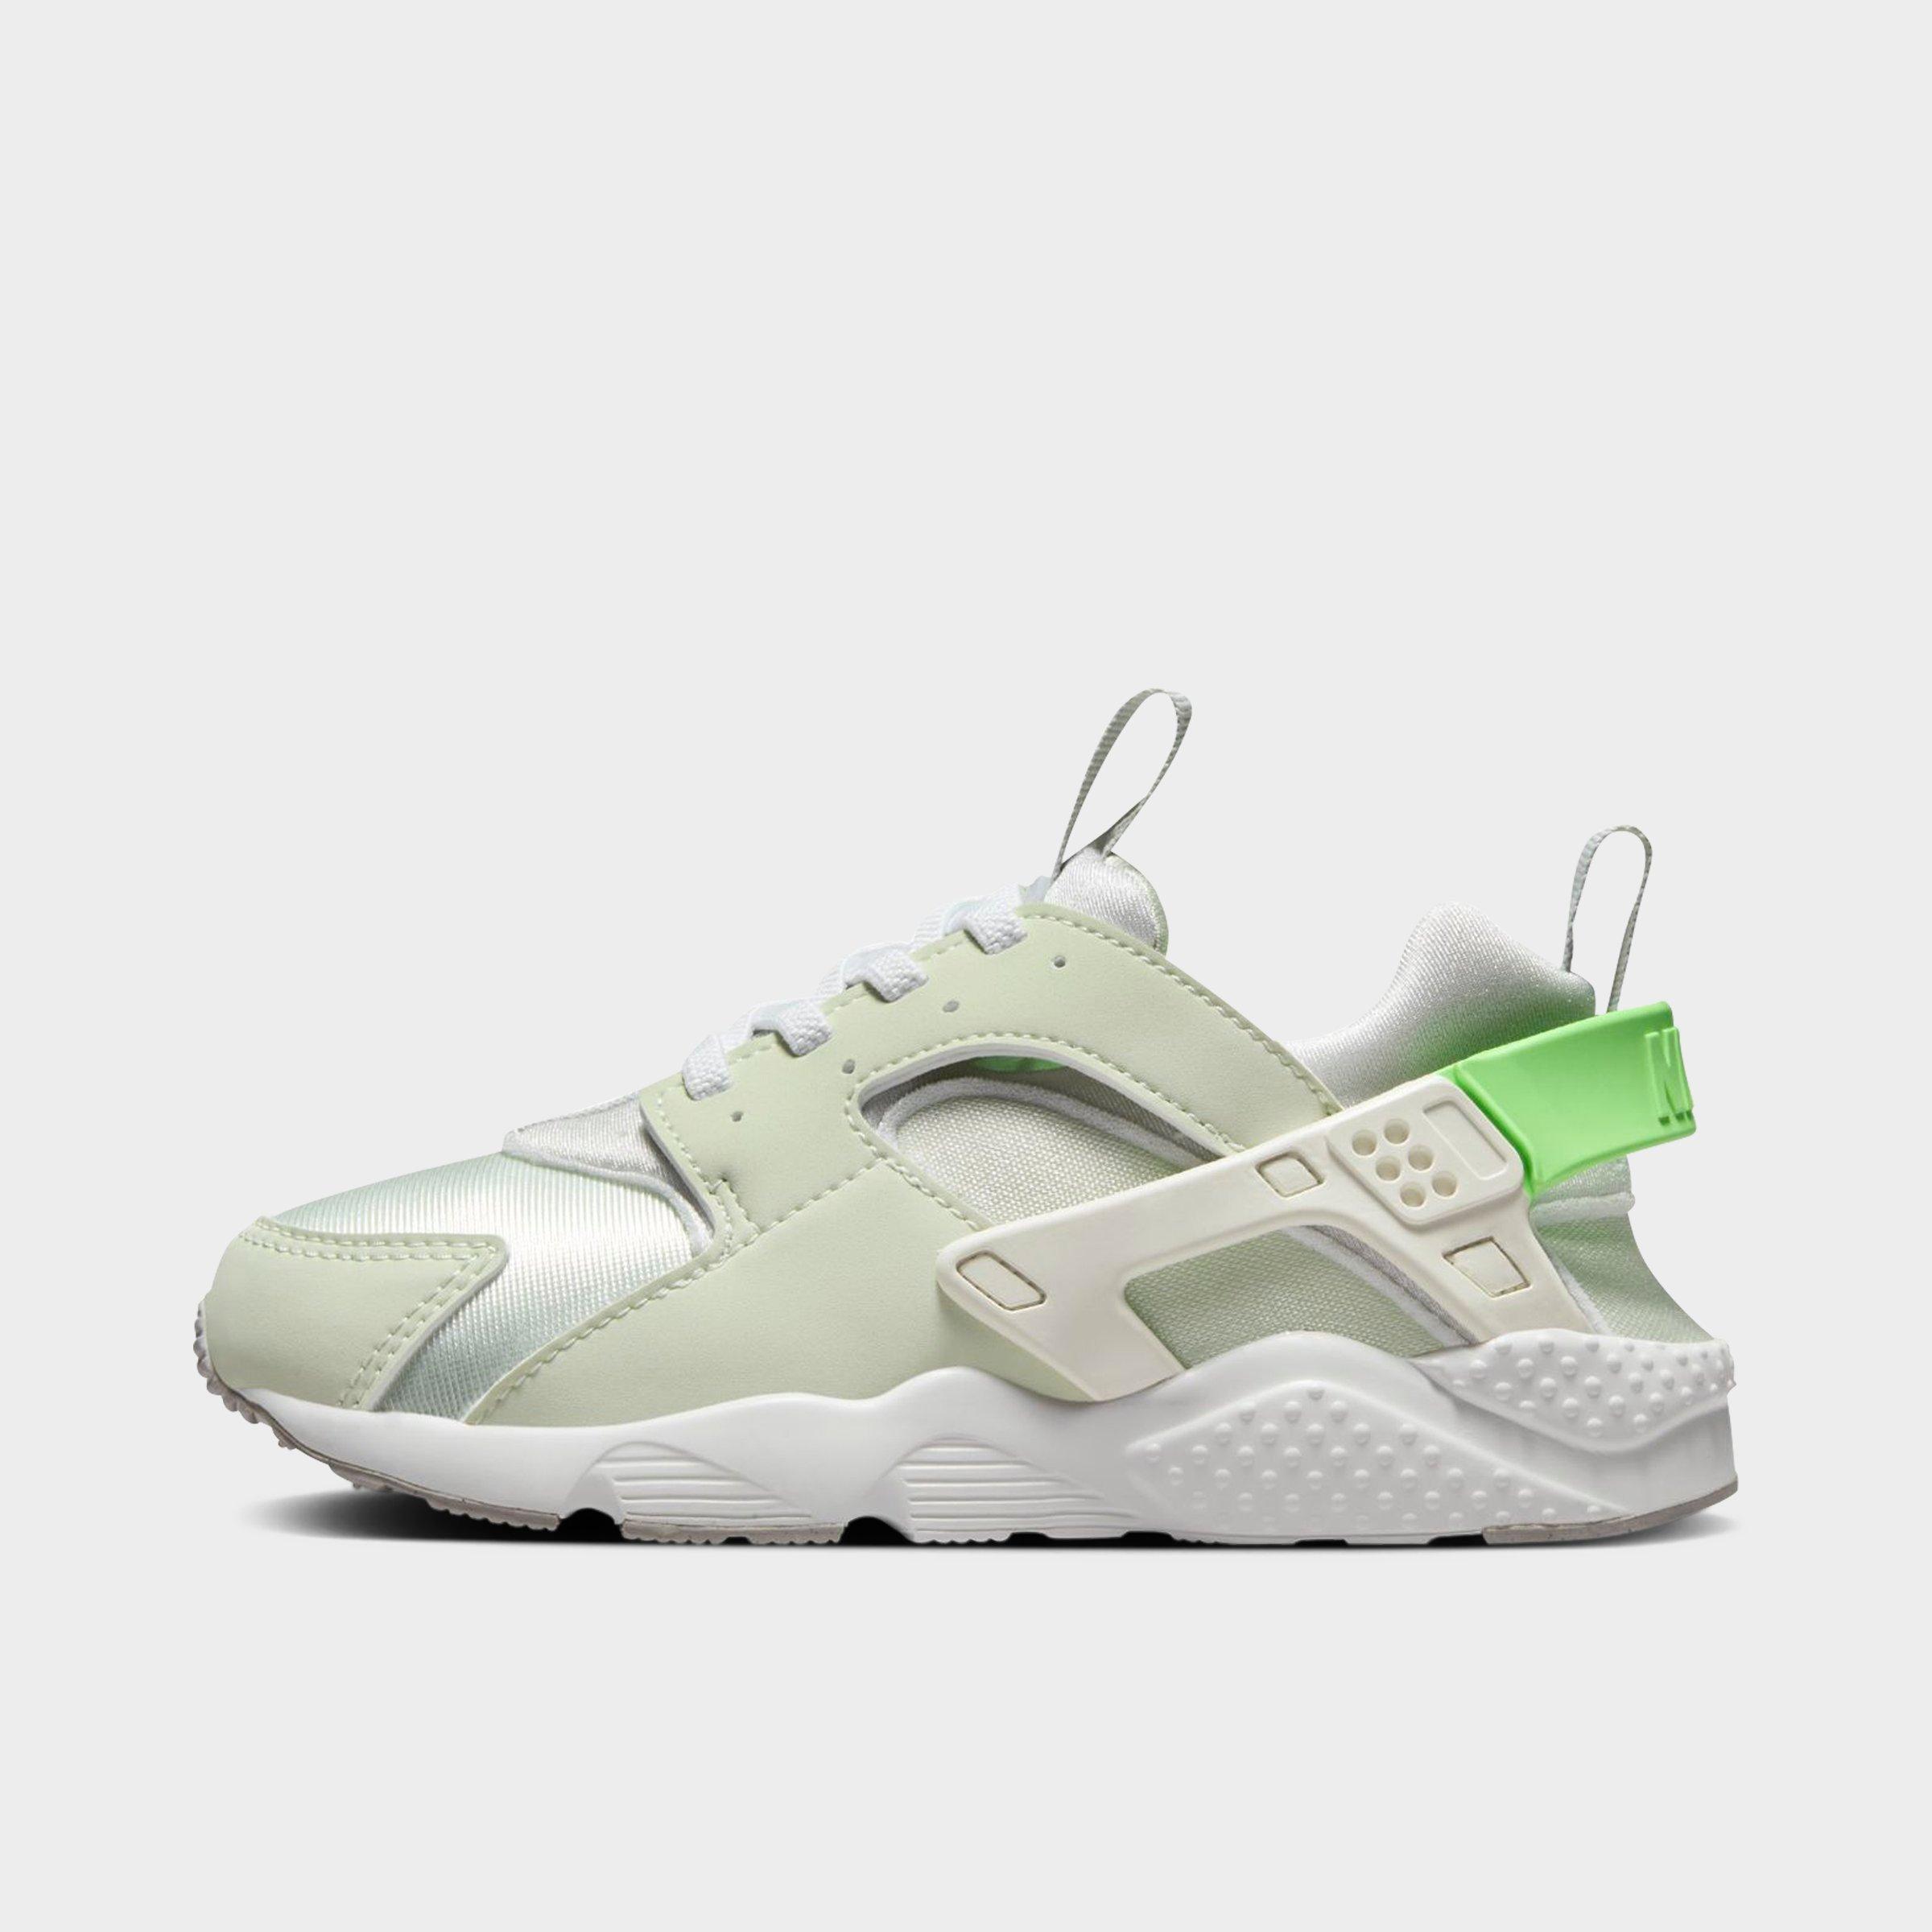 Nike Babies'  Kids' Toddler Huarache Run 2.0 Stretch Lace Casual Shoes In Sea Glass/light Iron Ore/summit White/lime Blast